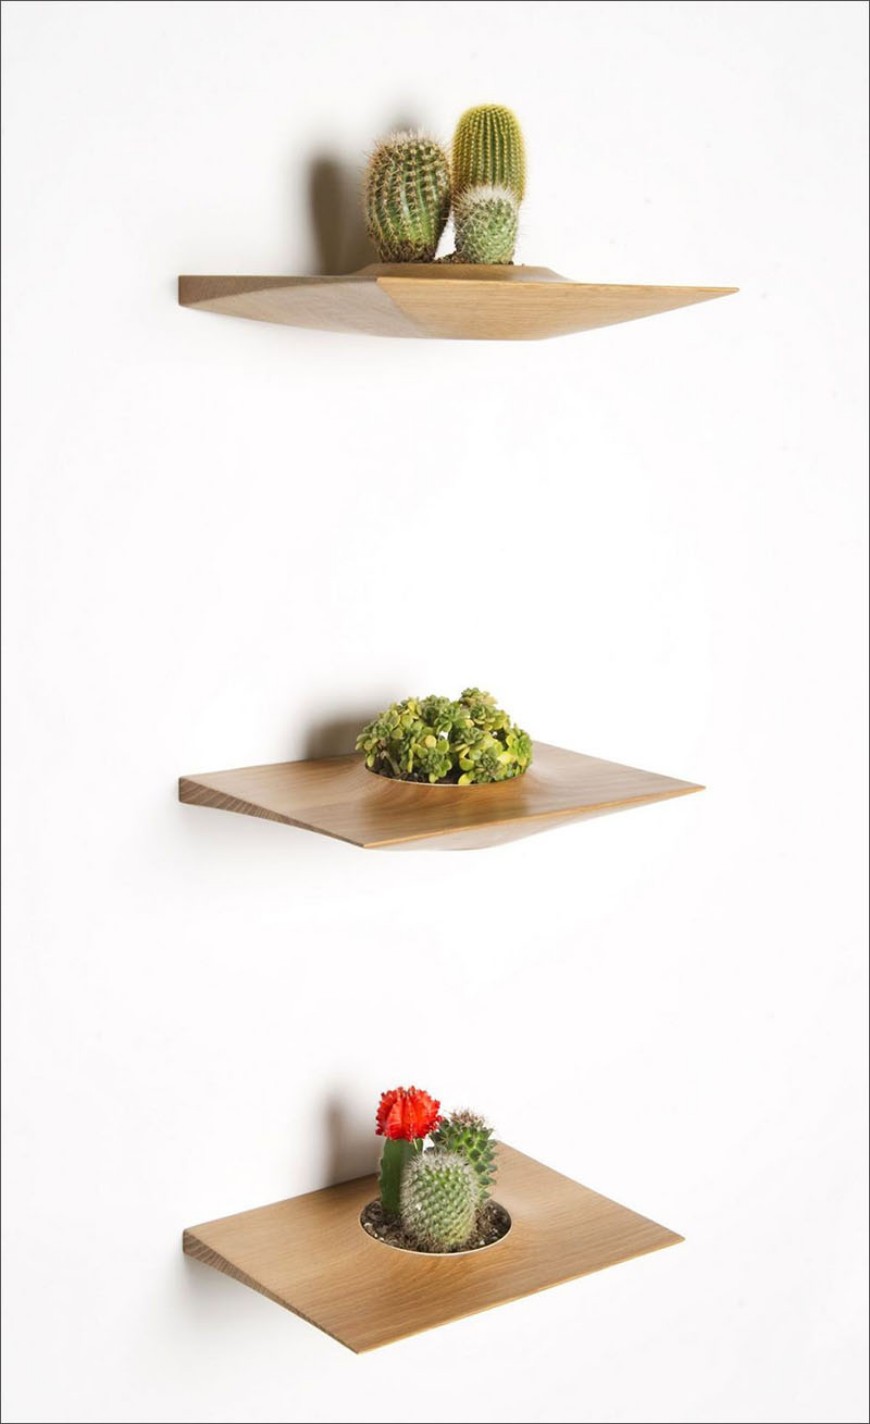 10 Modern Wall Mounted Plant Holders To Decorate Bare Walls (6)